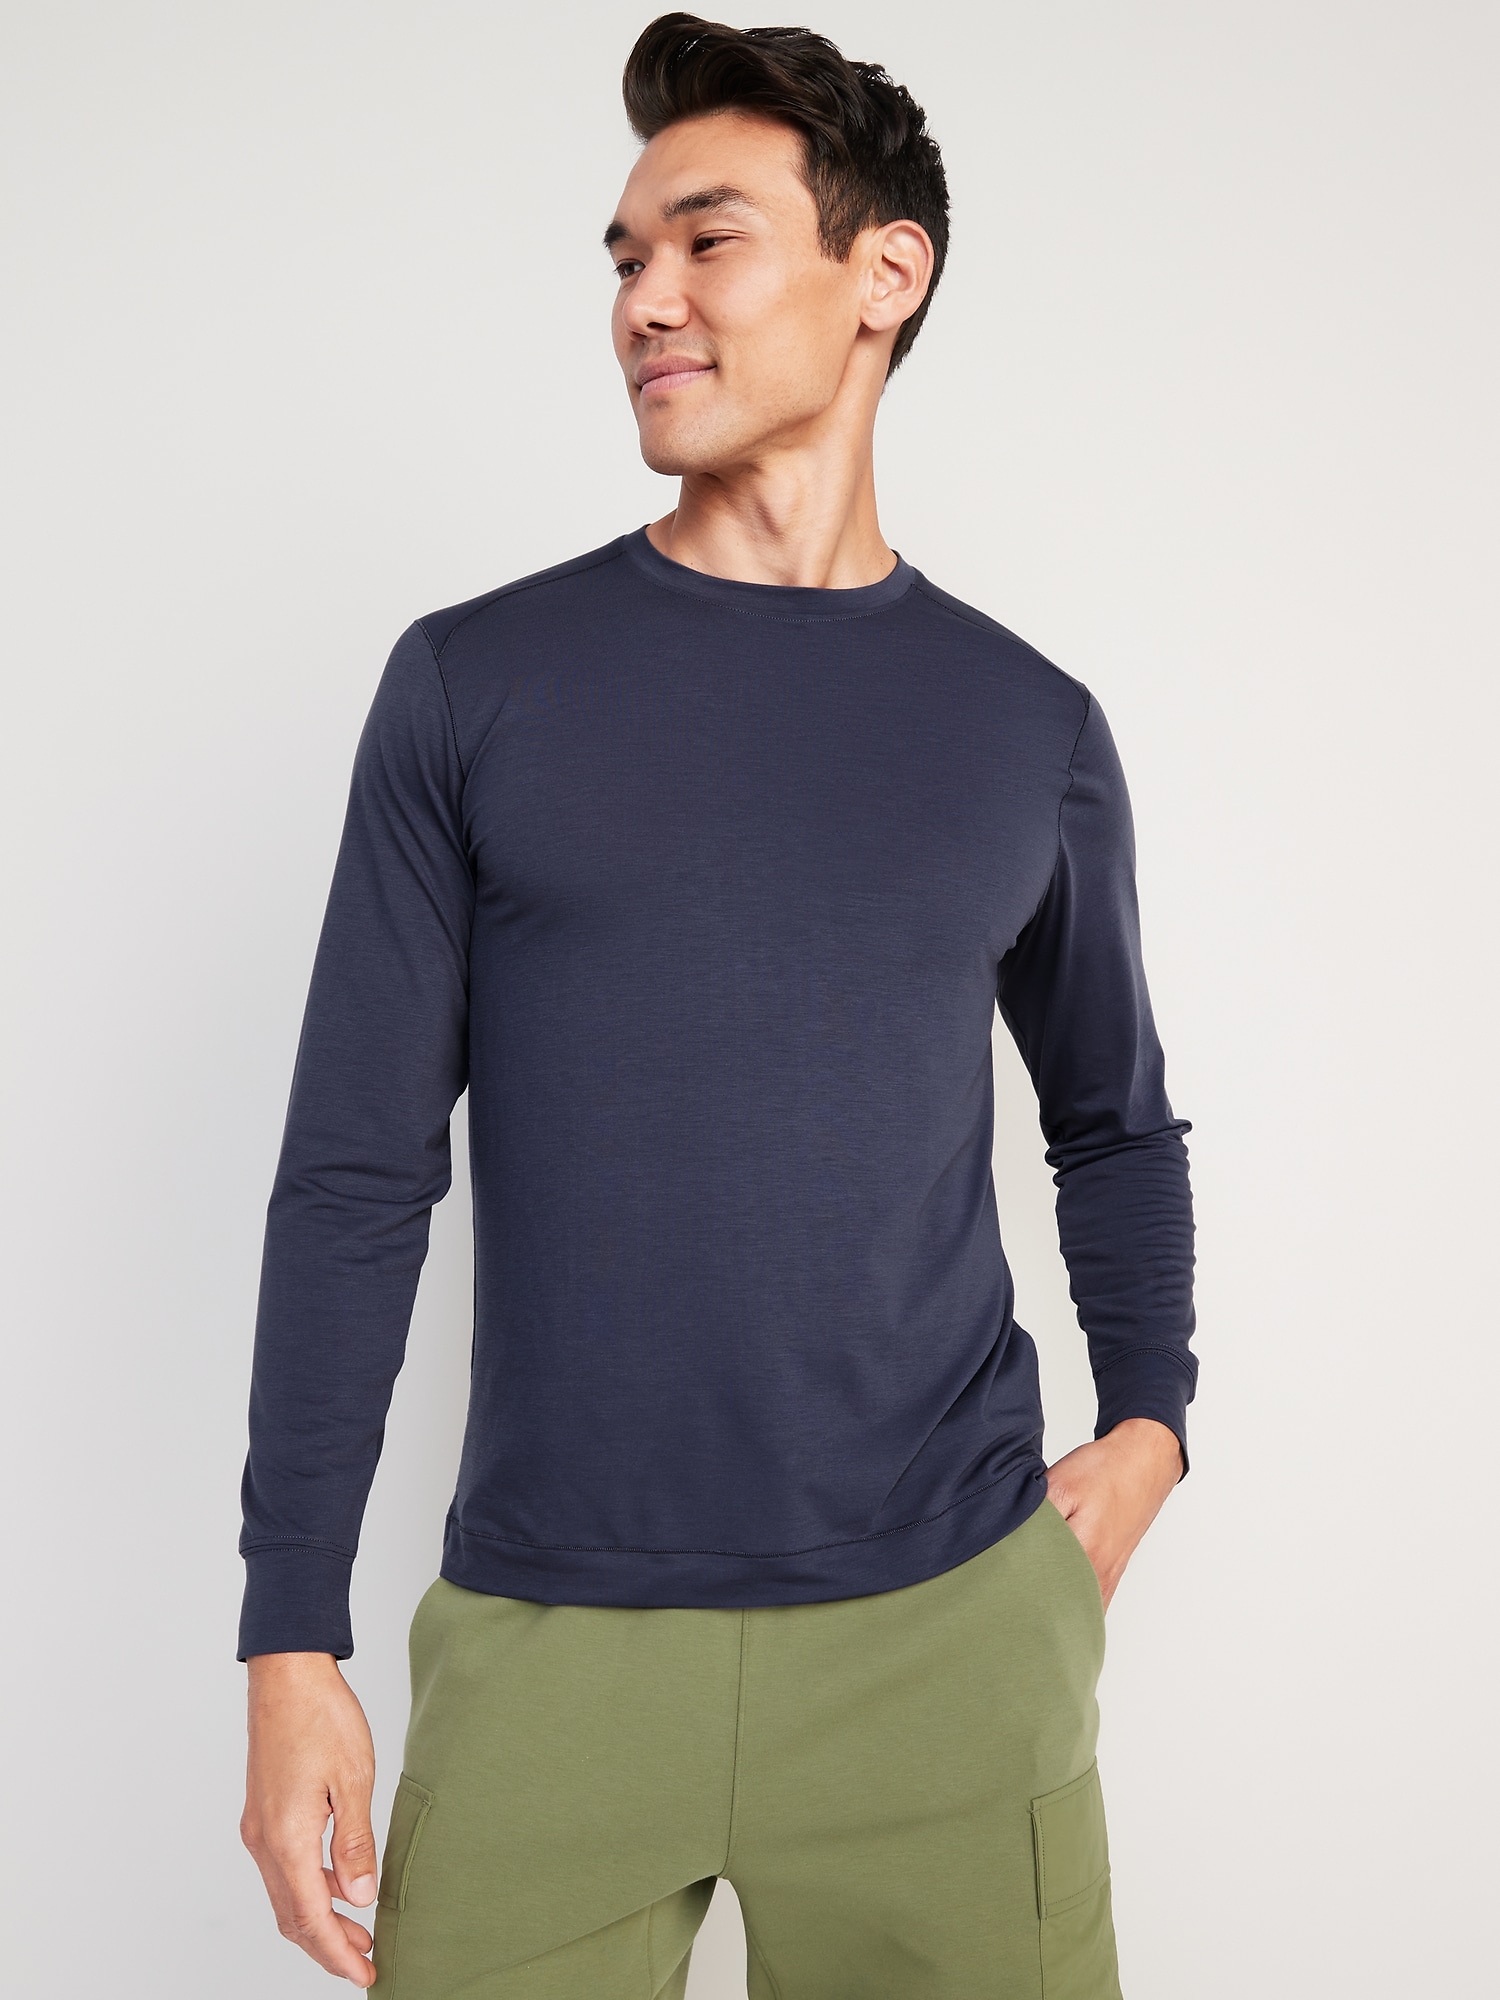 Beyond 4-Way Stretch Long-Sleeve T-Shirt | Old Navy